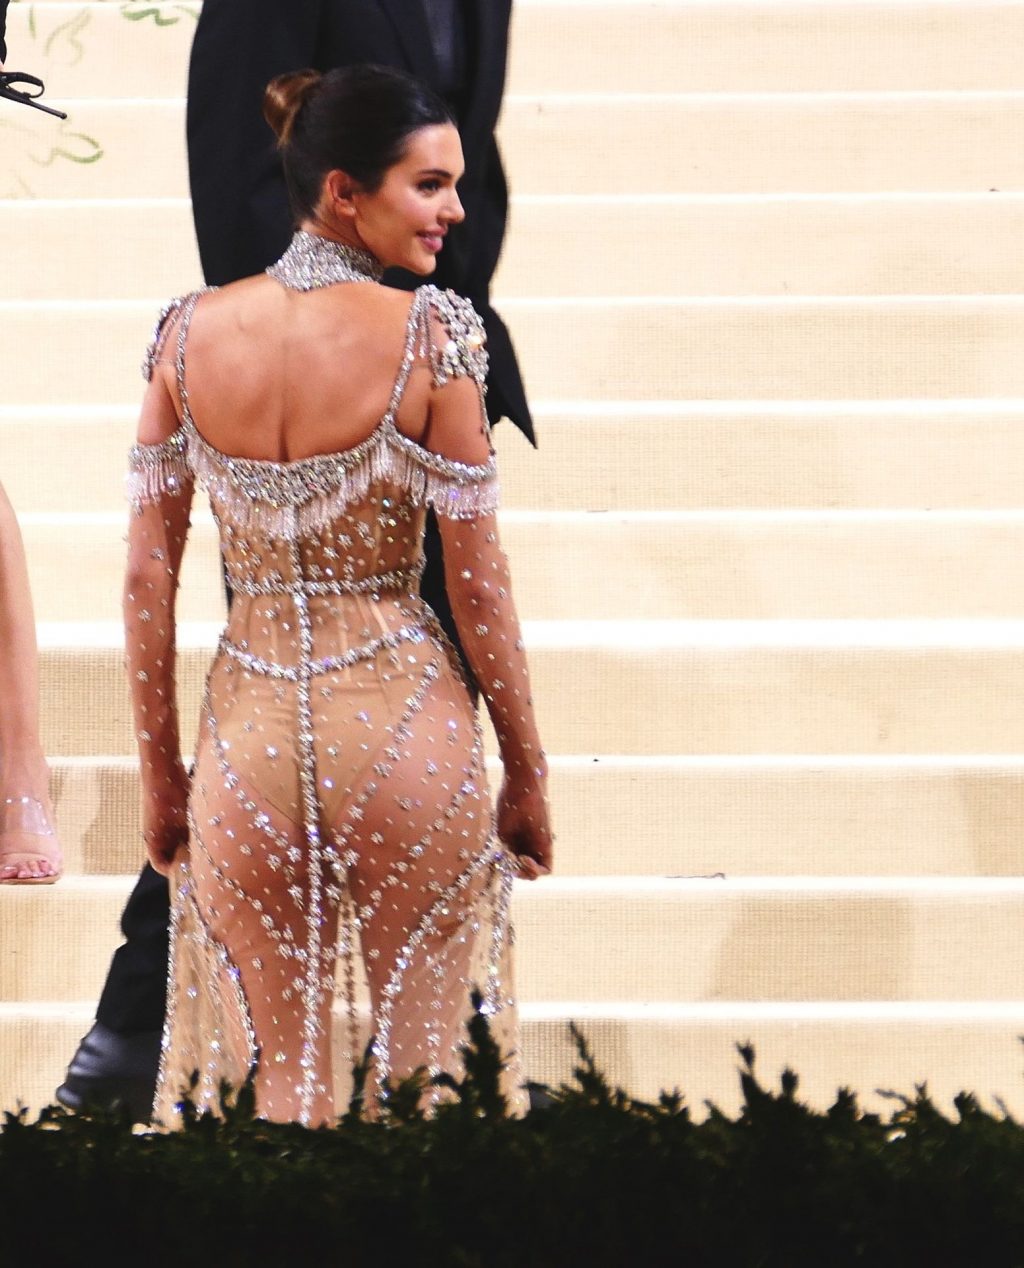 Kendall Jenner Rocks Naked G-String Dress To Steal The Spotlight From BFF Gigi Hadid (144 Photos)